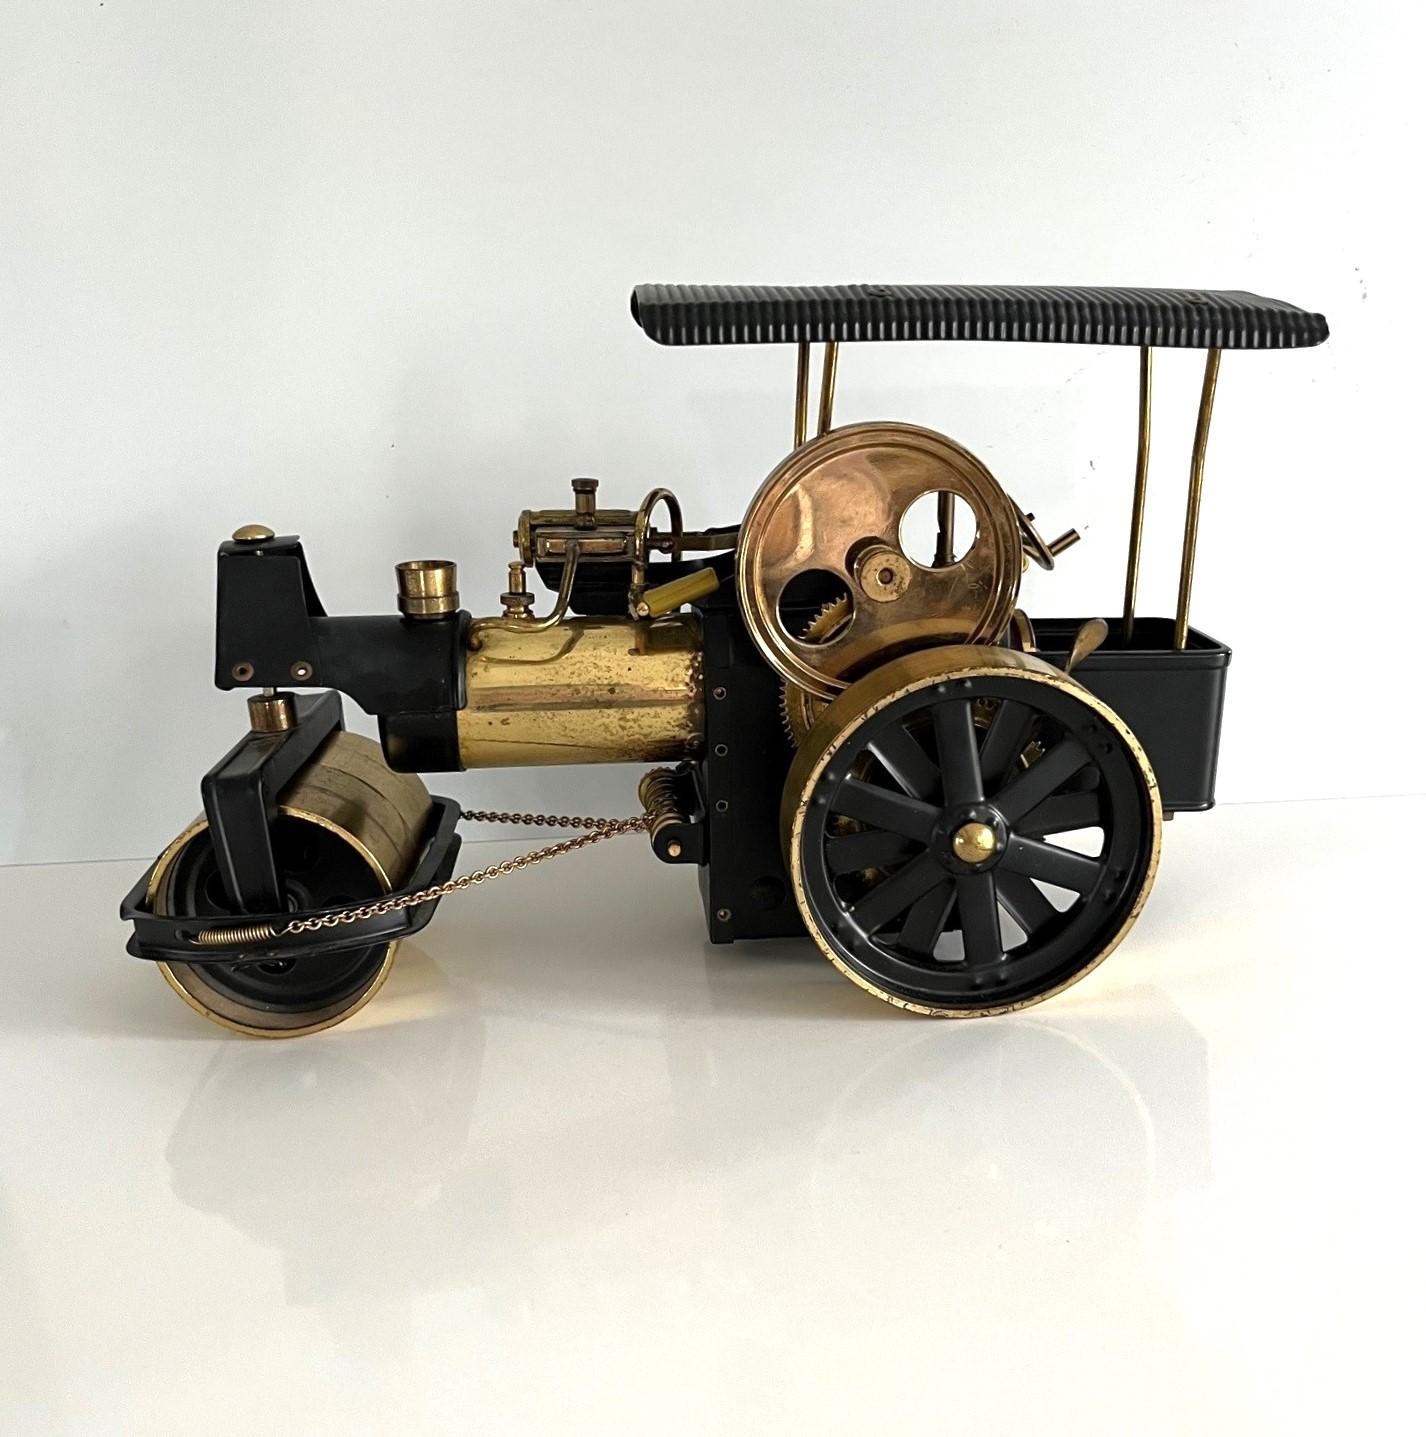 A lovely  Vintage Brass Steam Engine Model.  The piece has good scale and in very good condition, a perfect decorative art piece or shelf model.

Made is West Germany, the item dates to circa 1970s when these where popular as working toys, with